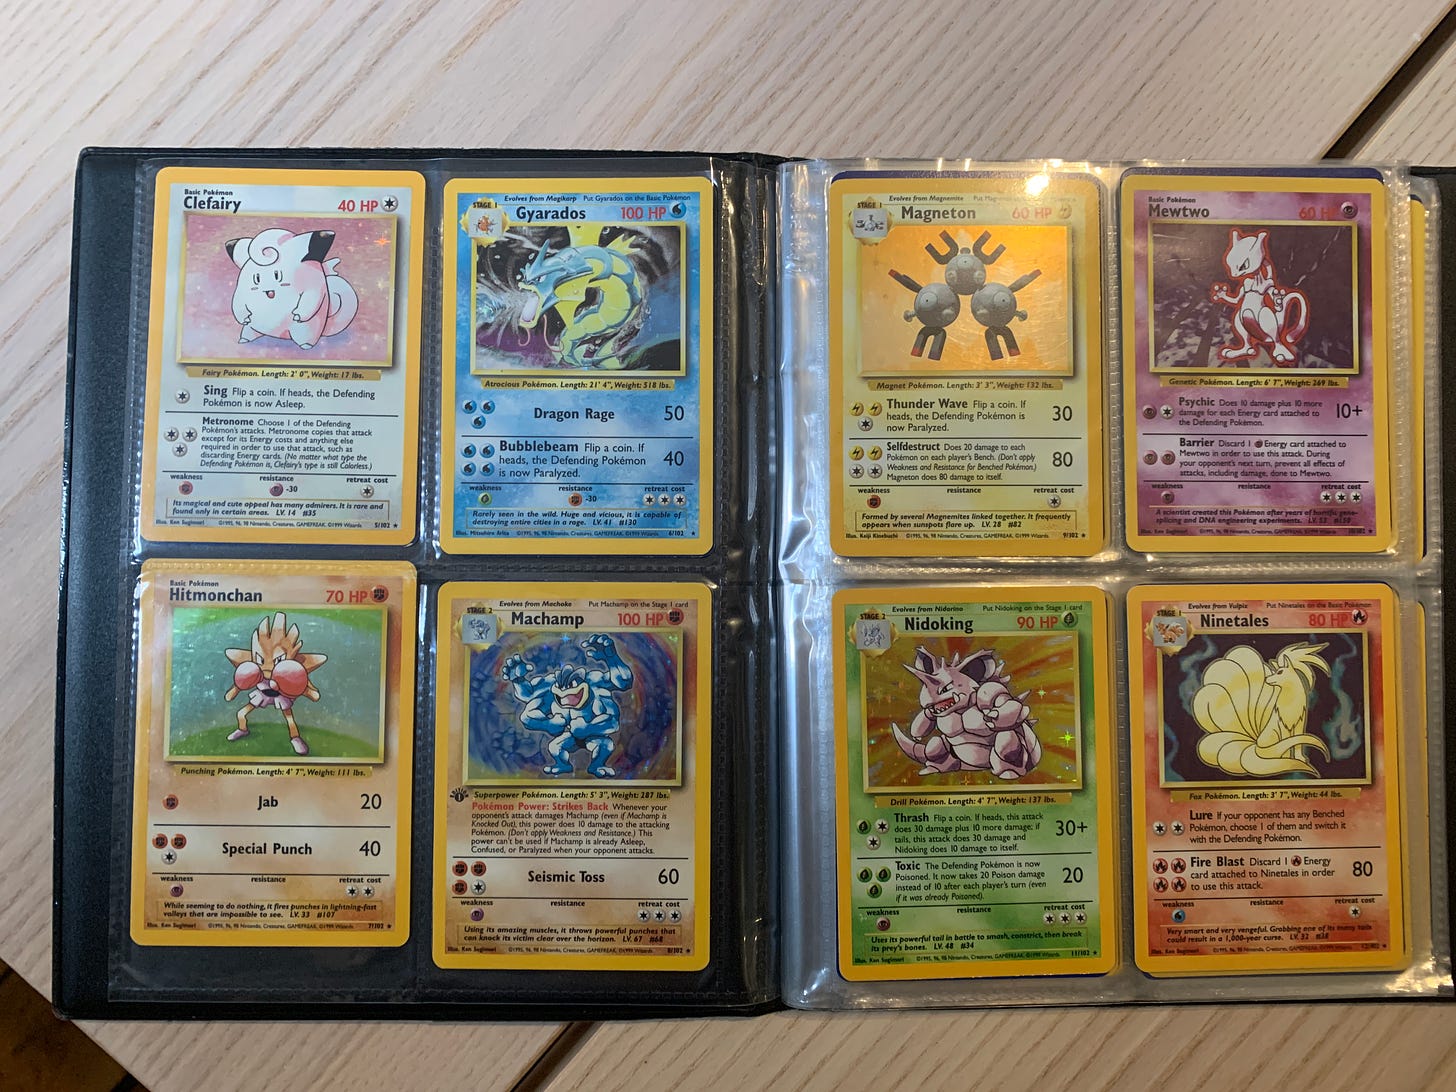 Dom shared a small sample of his Pokémon cards from childhood. He was fortunate enough to complete the entire Base, Jungle, and Team Rocket trading card sets!